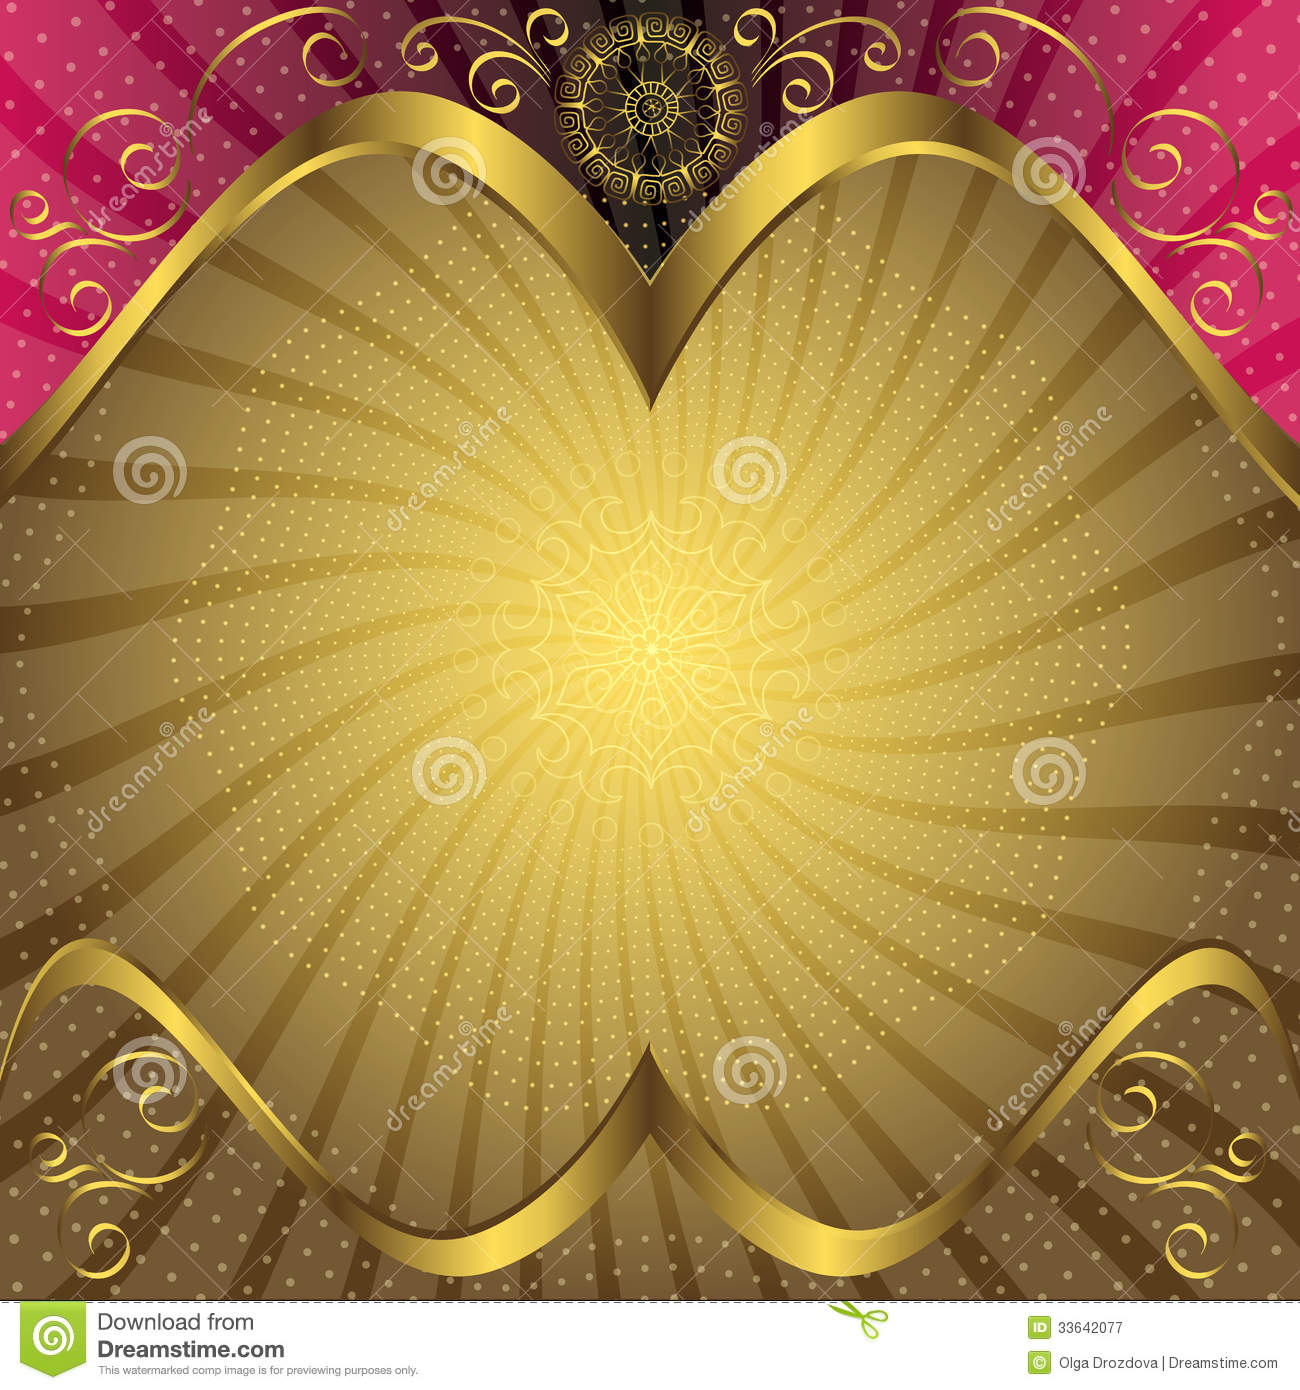 Purple and Gold Background Design Free